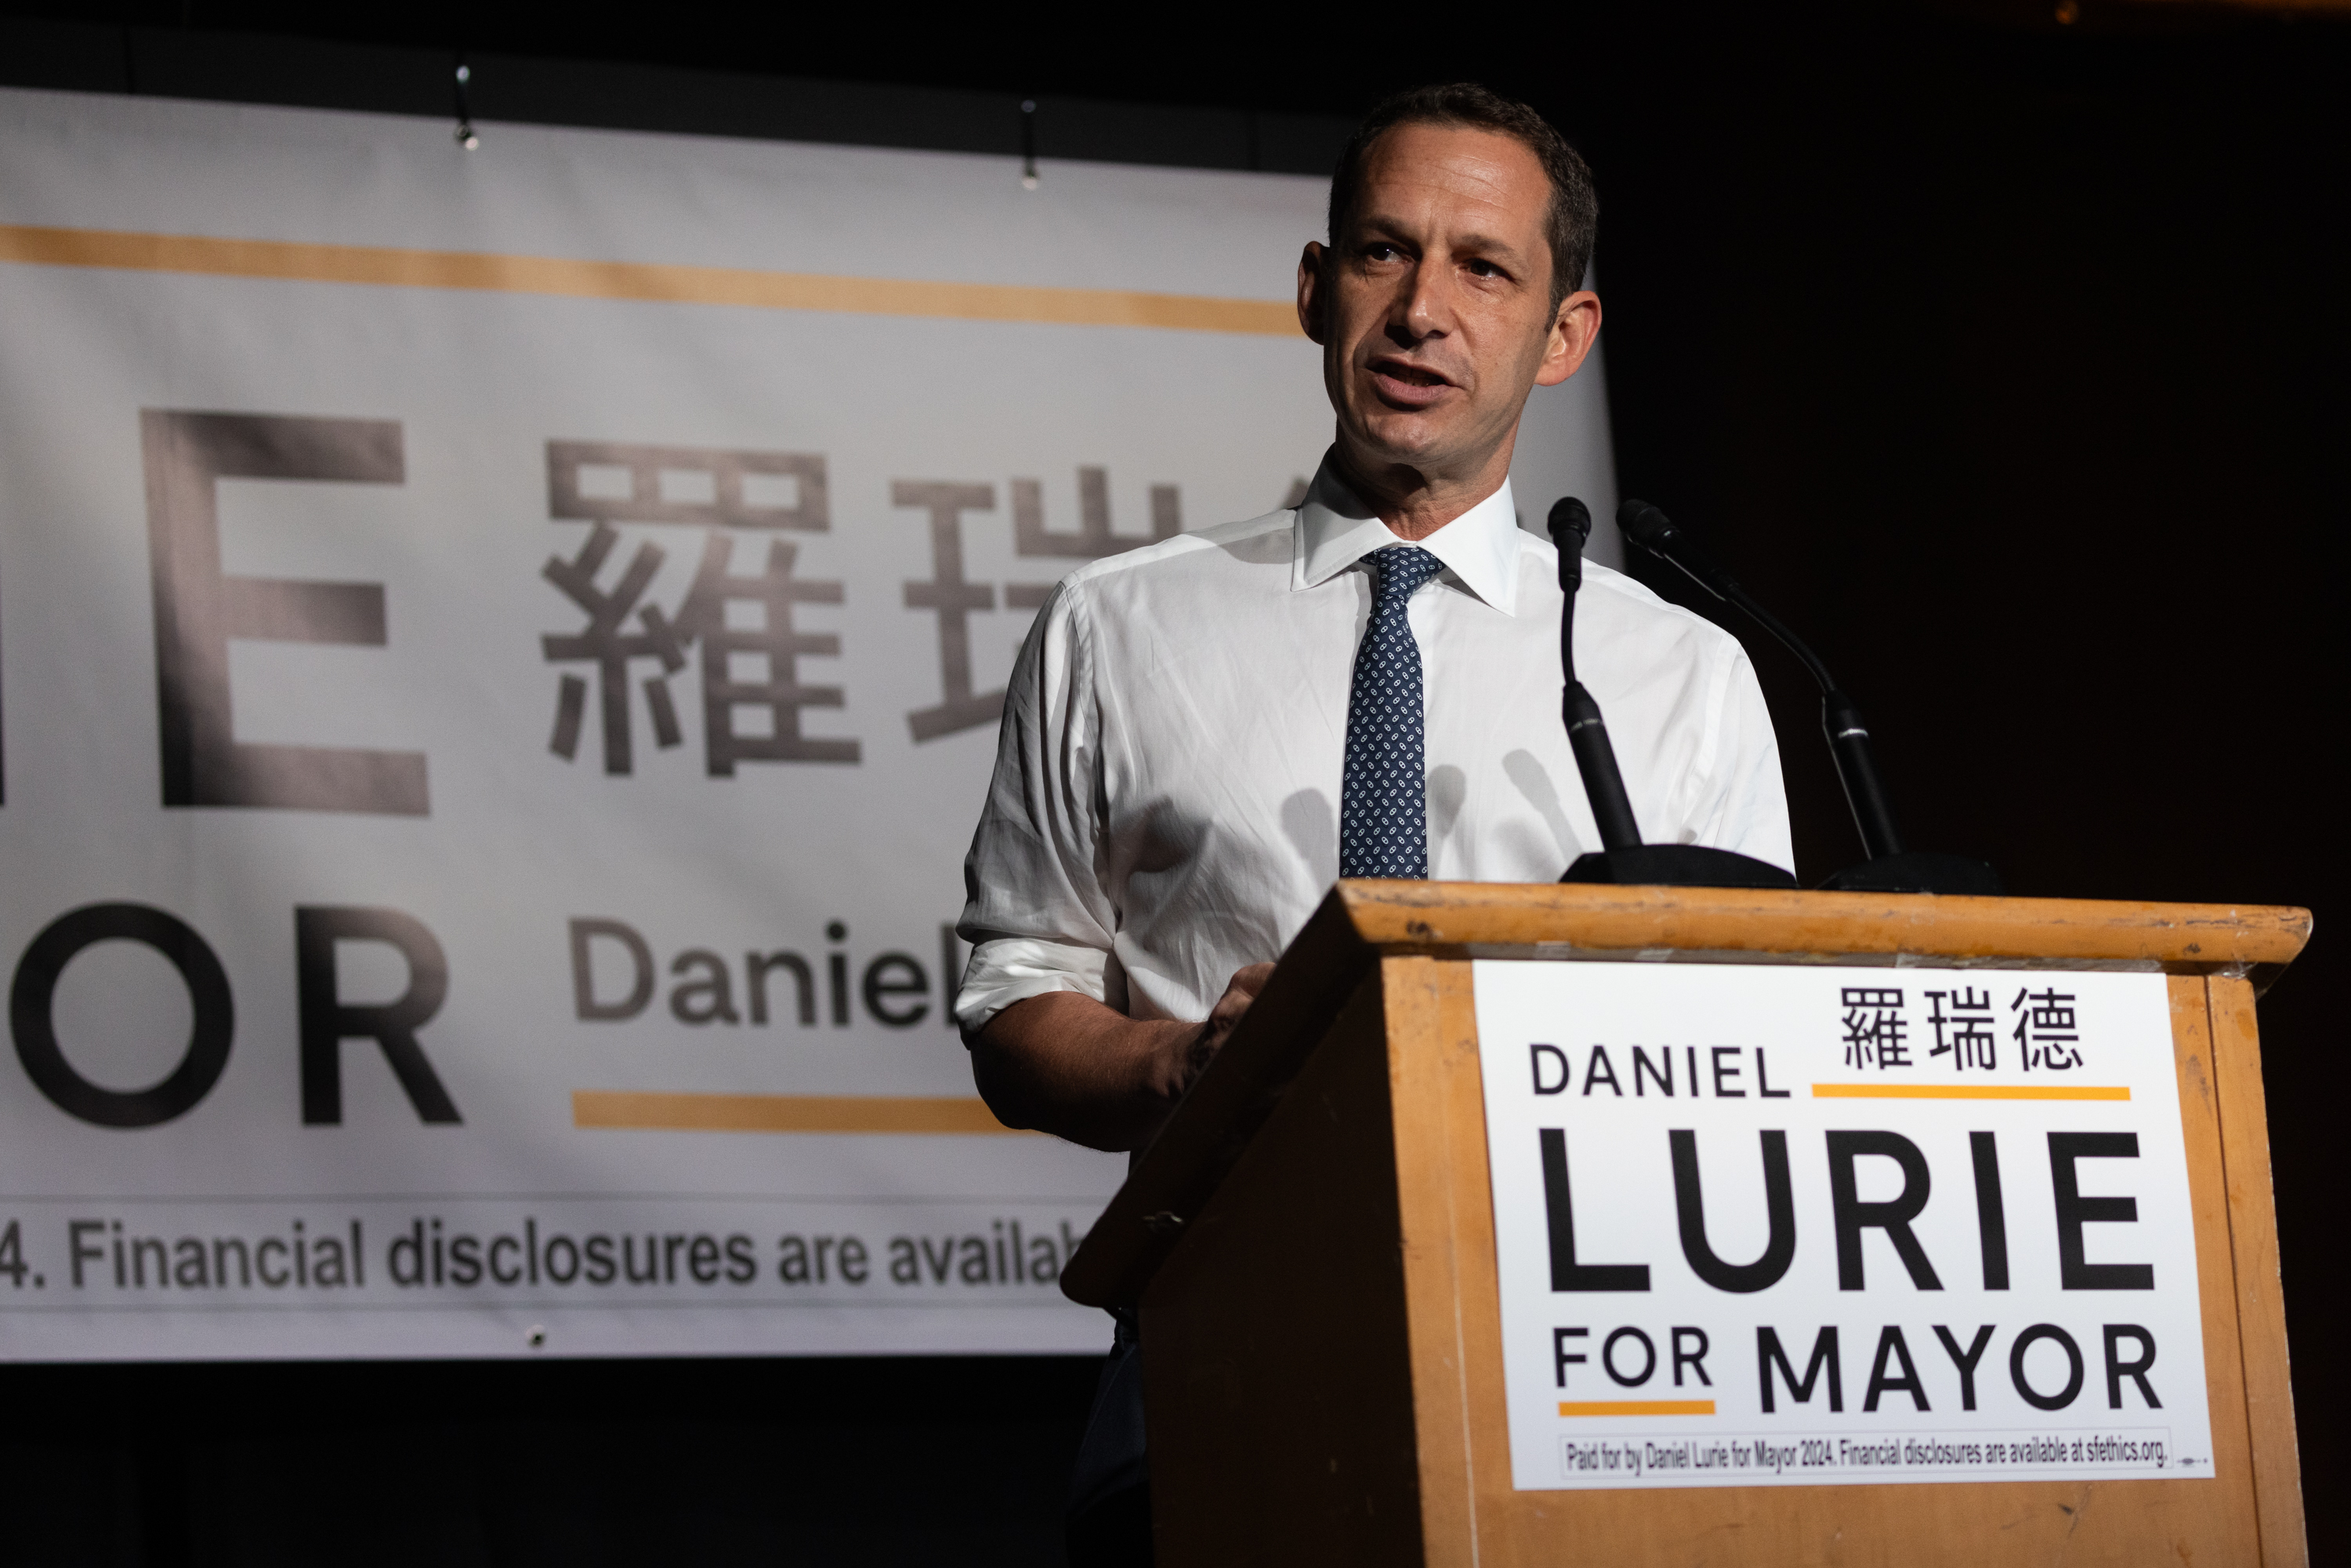 A man in a white shirt and tie speaks at a podium with "Daniel Lurie for Mayor" banners.